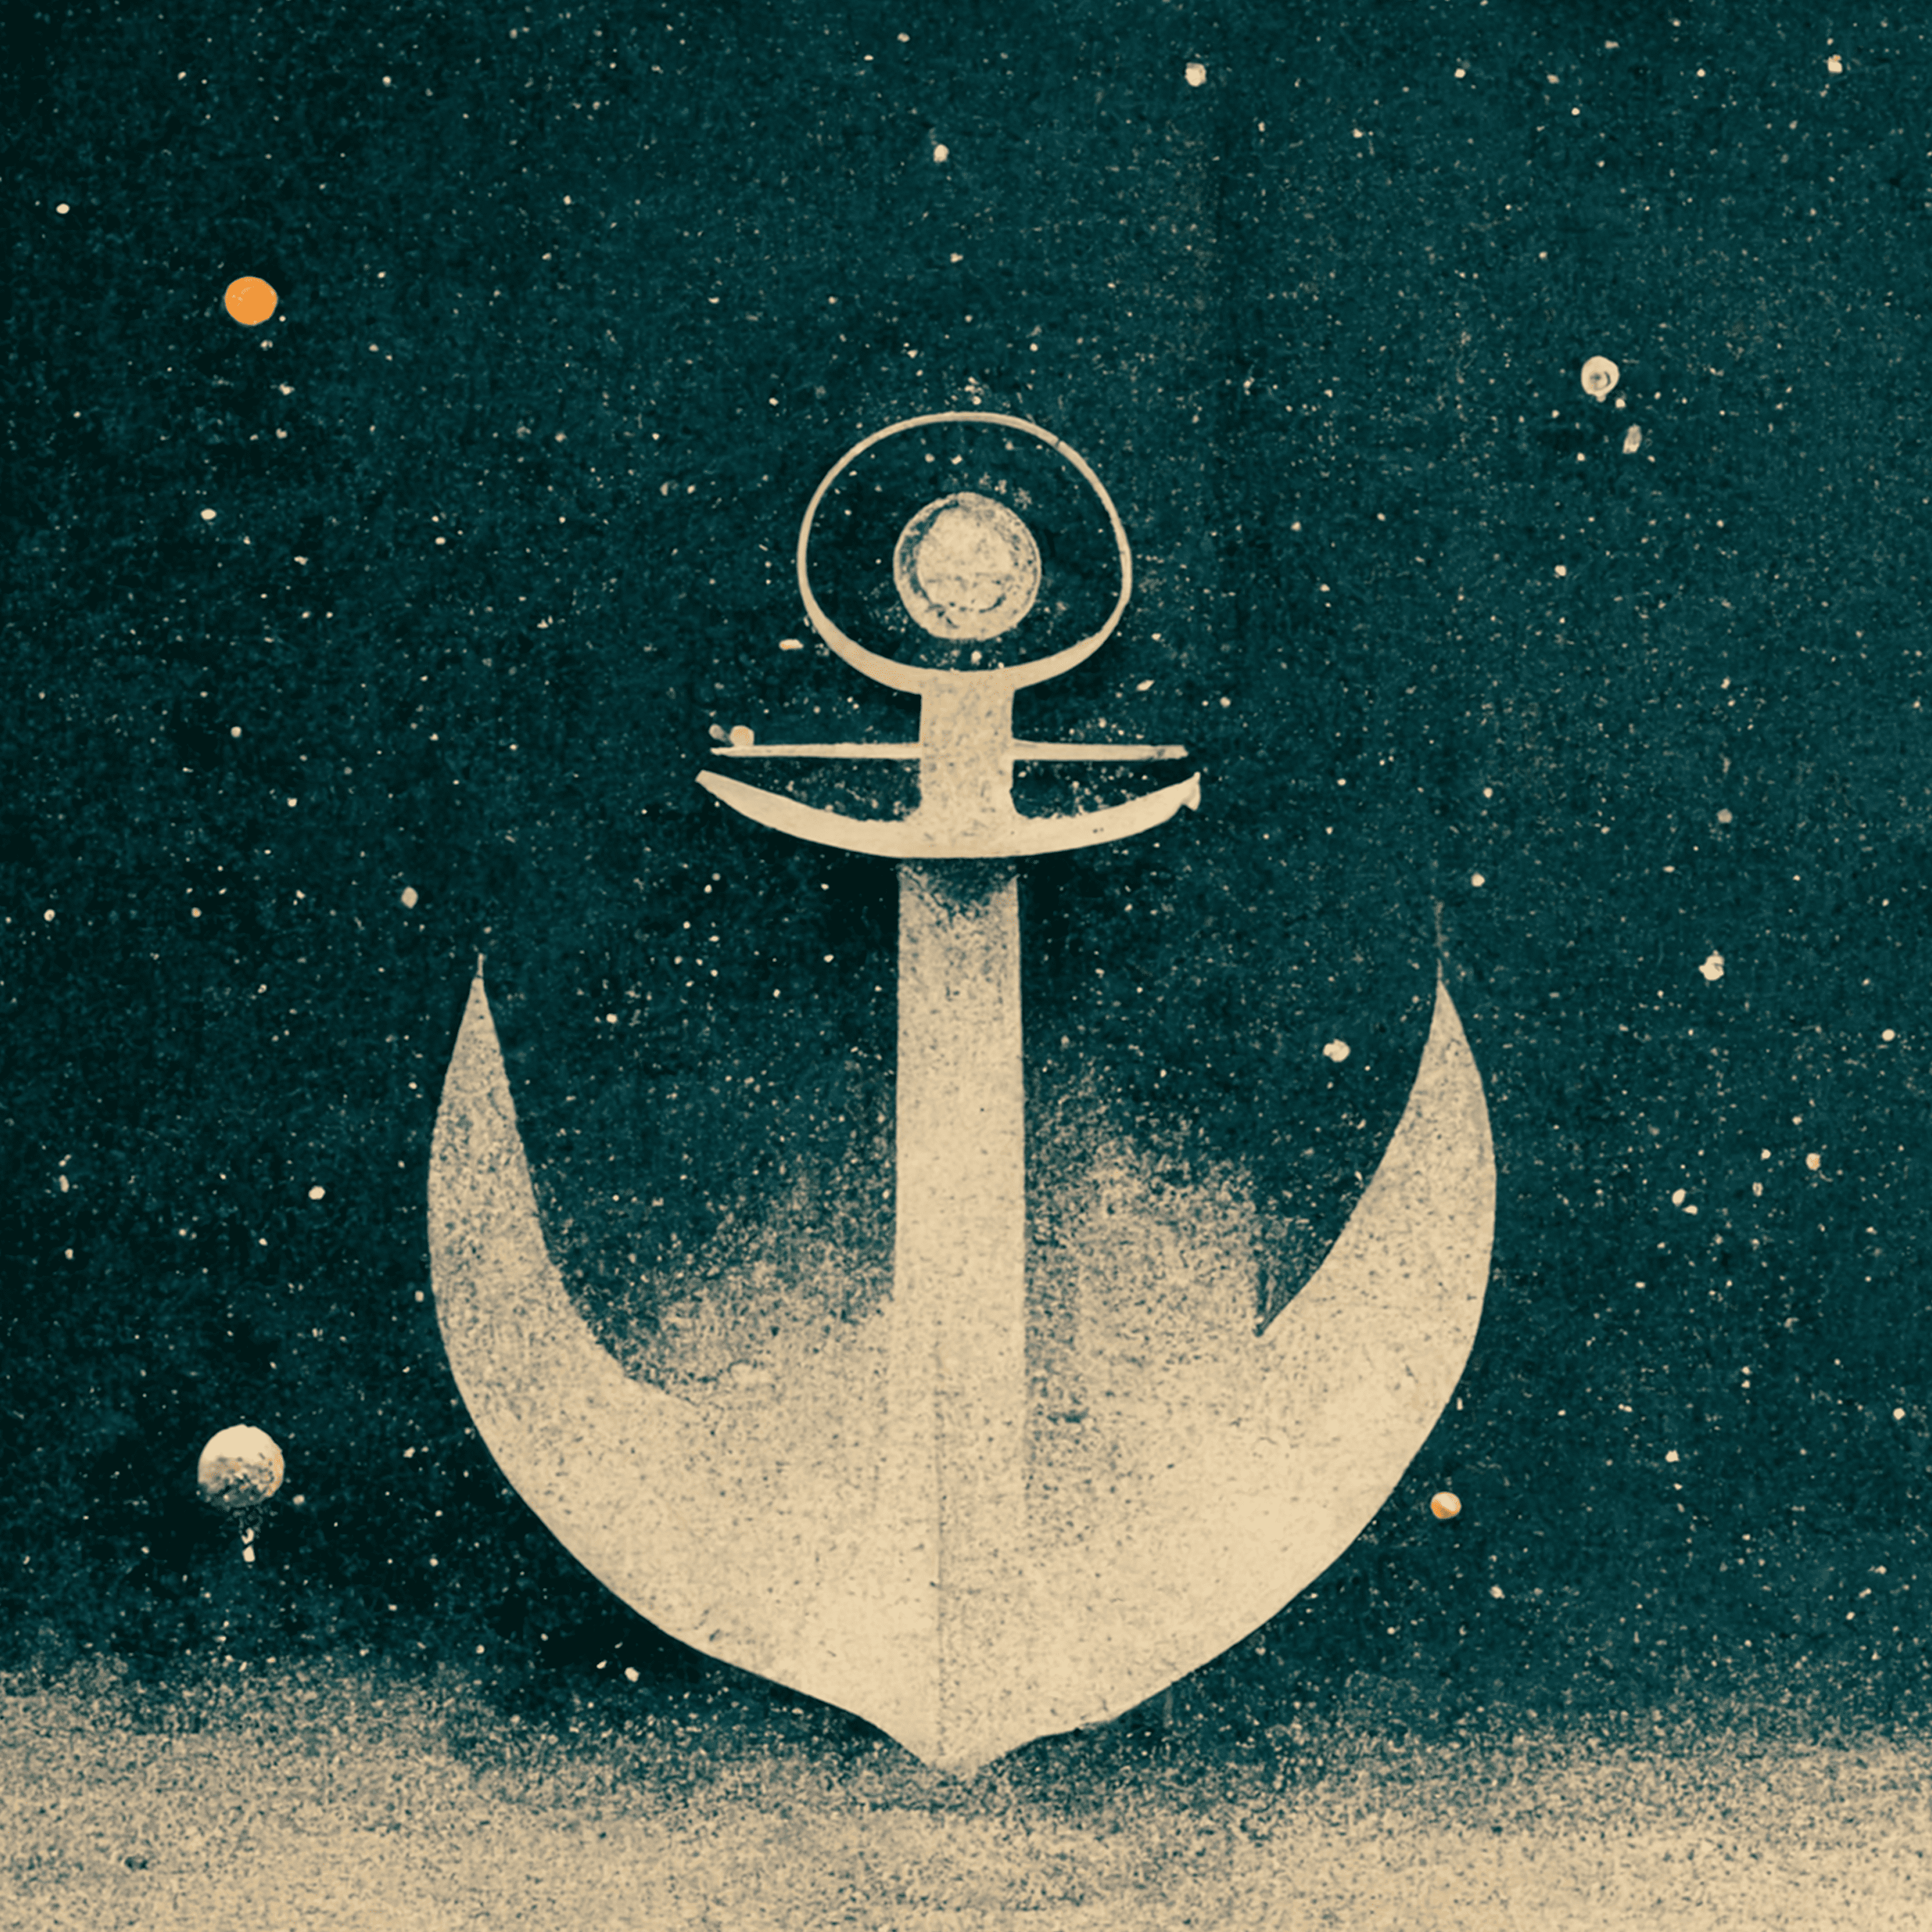 Cover art for rilles's song: Anchor